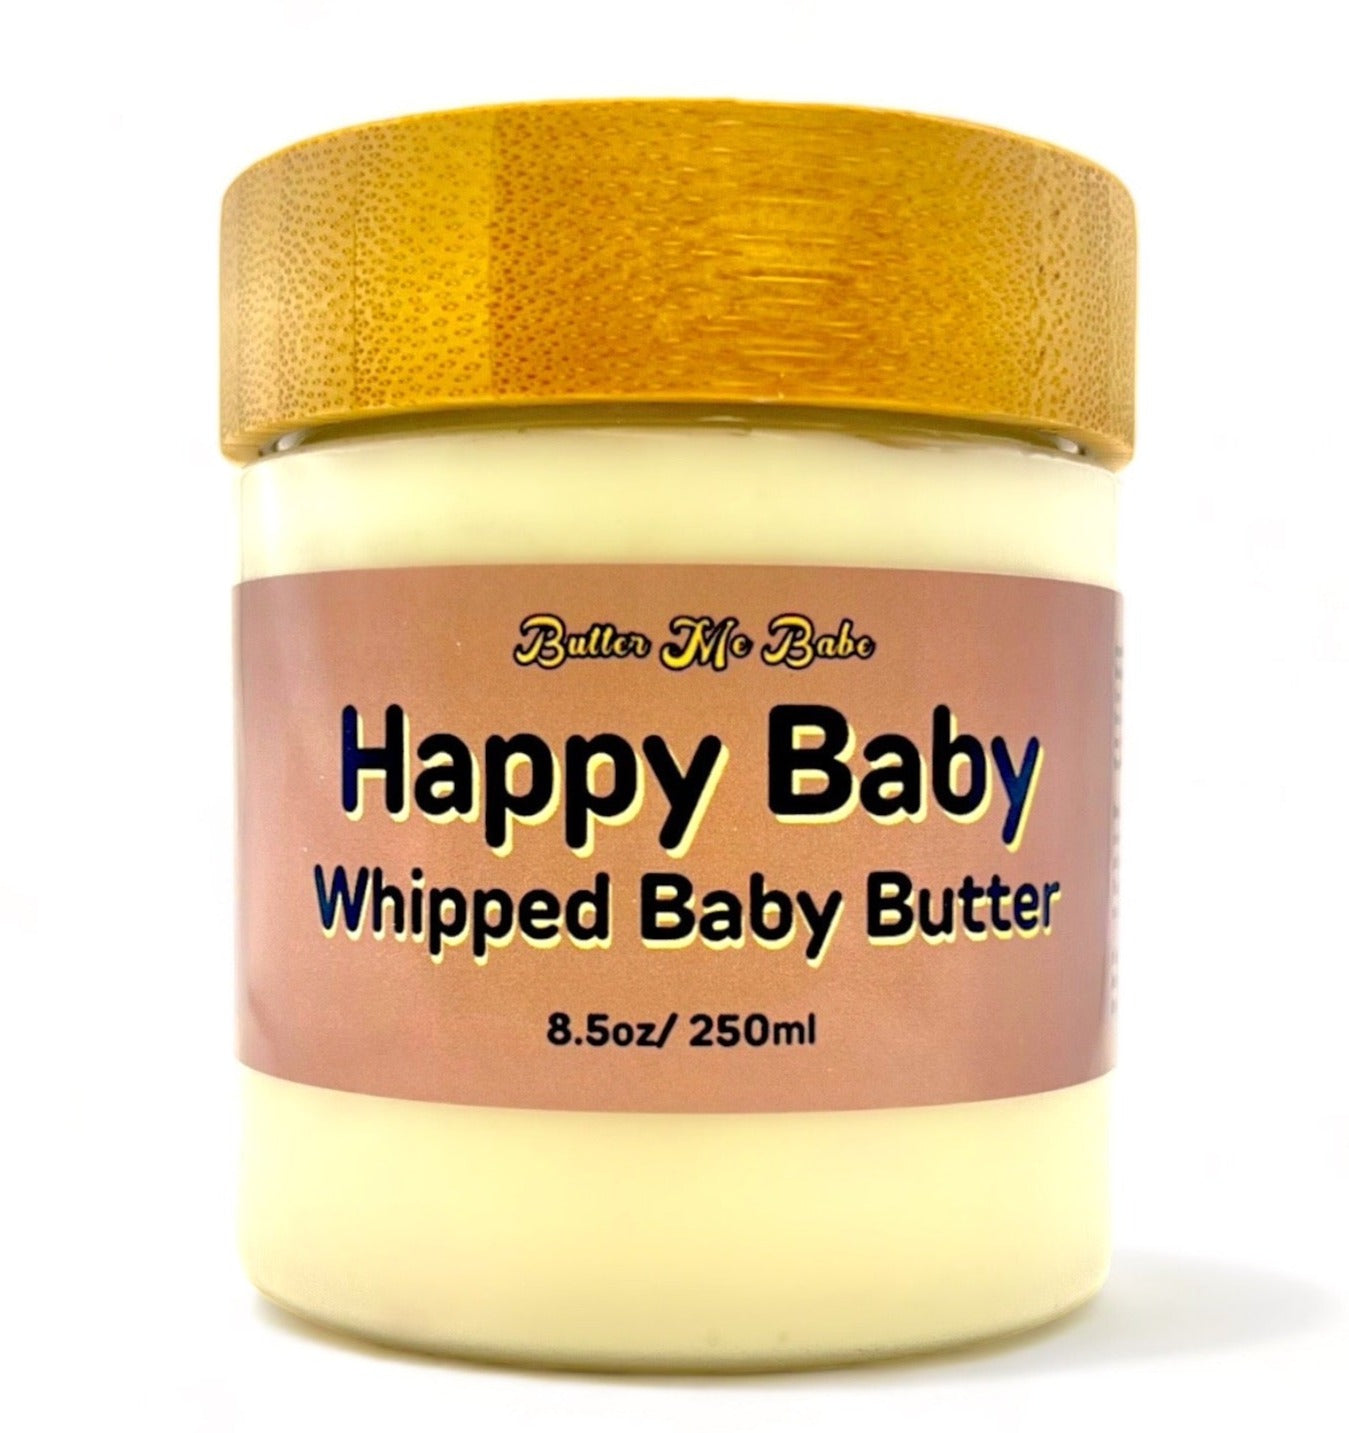 Happy Baby Whipped Baby Butter